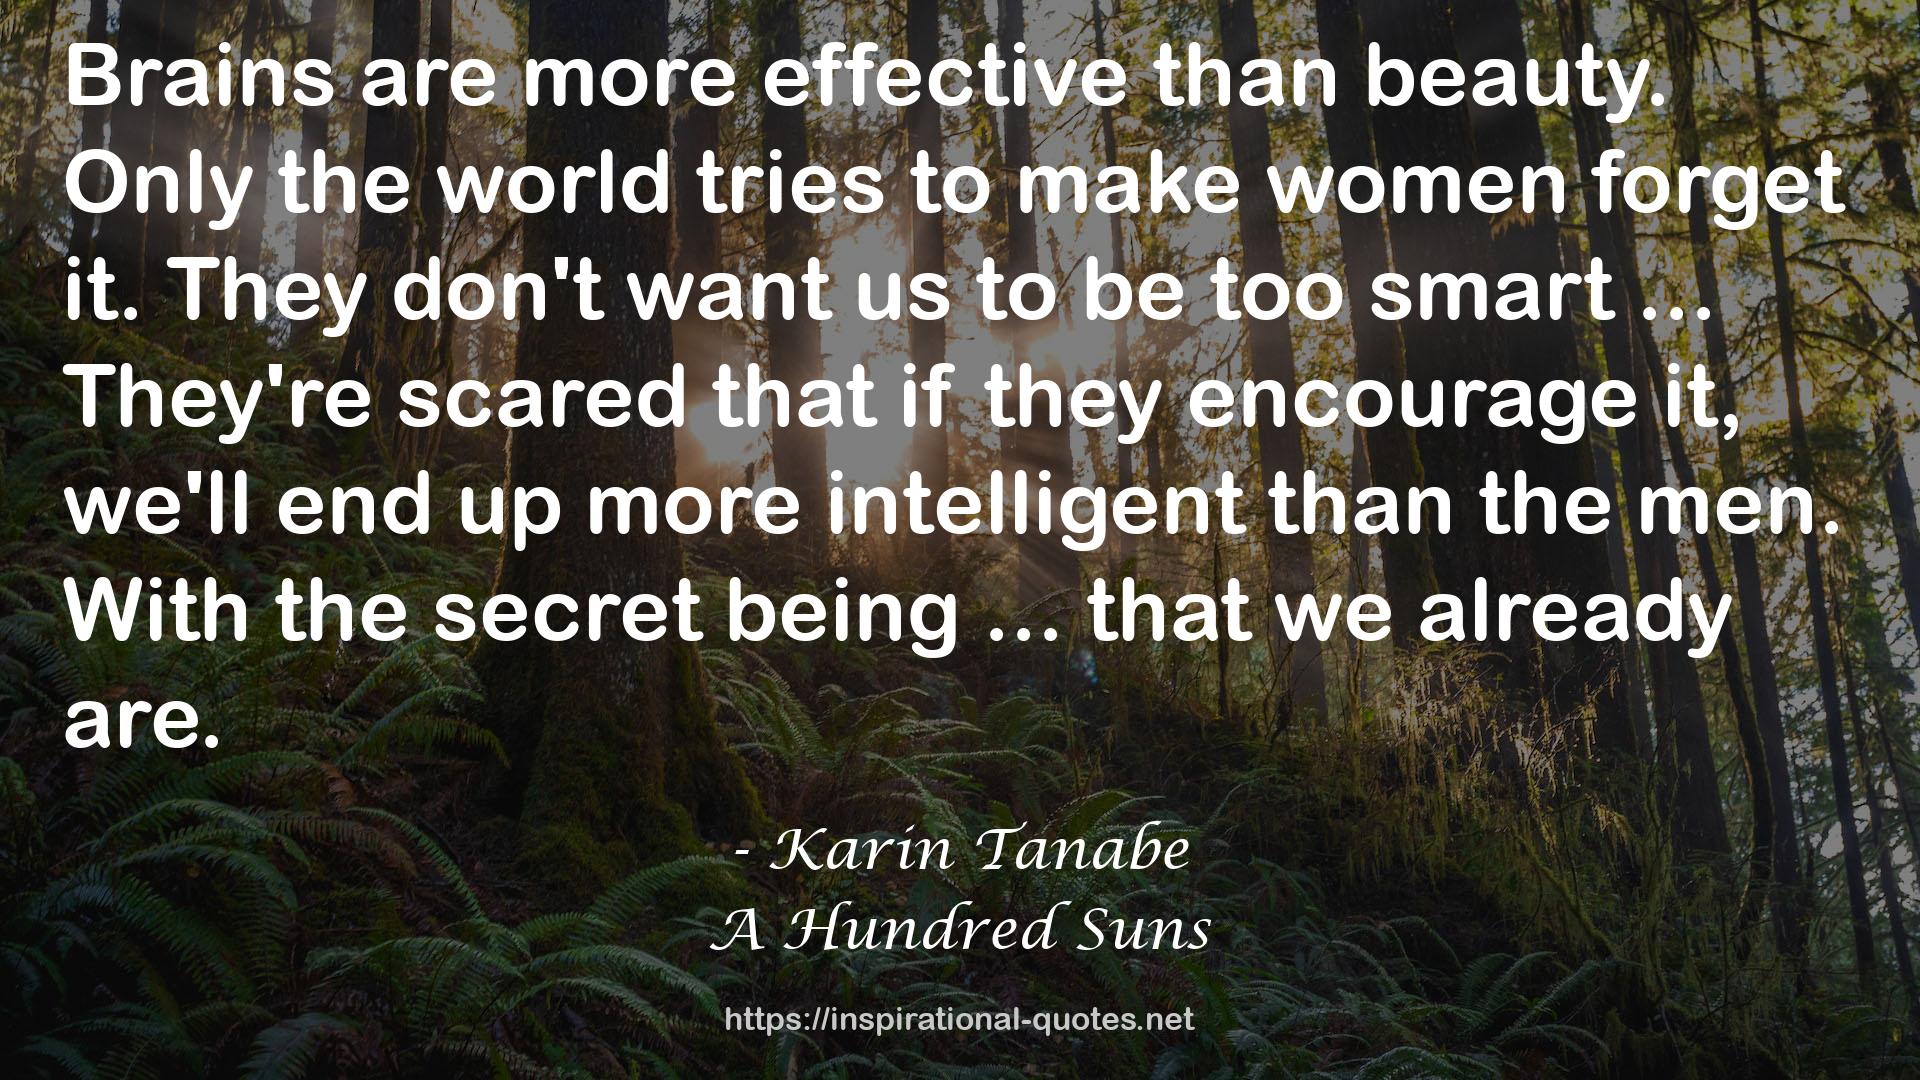 Karin Tanabe QUOTES